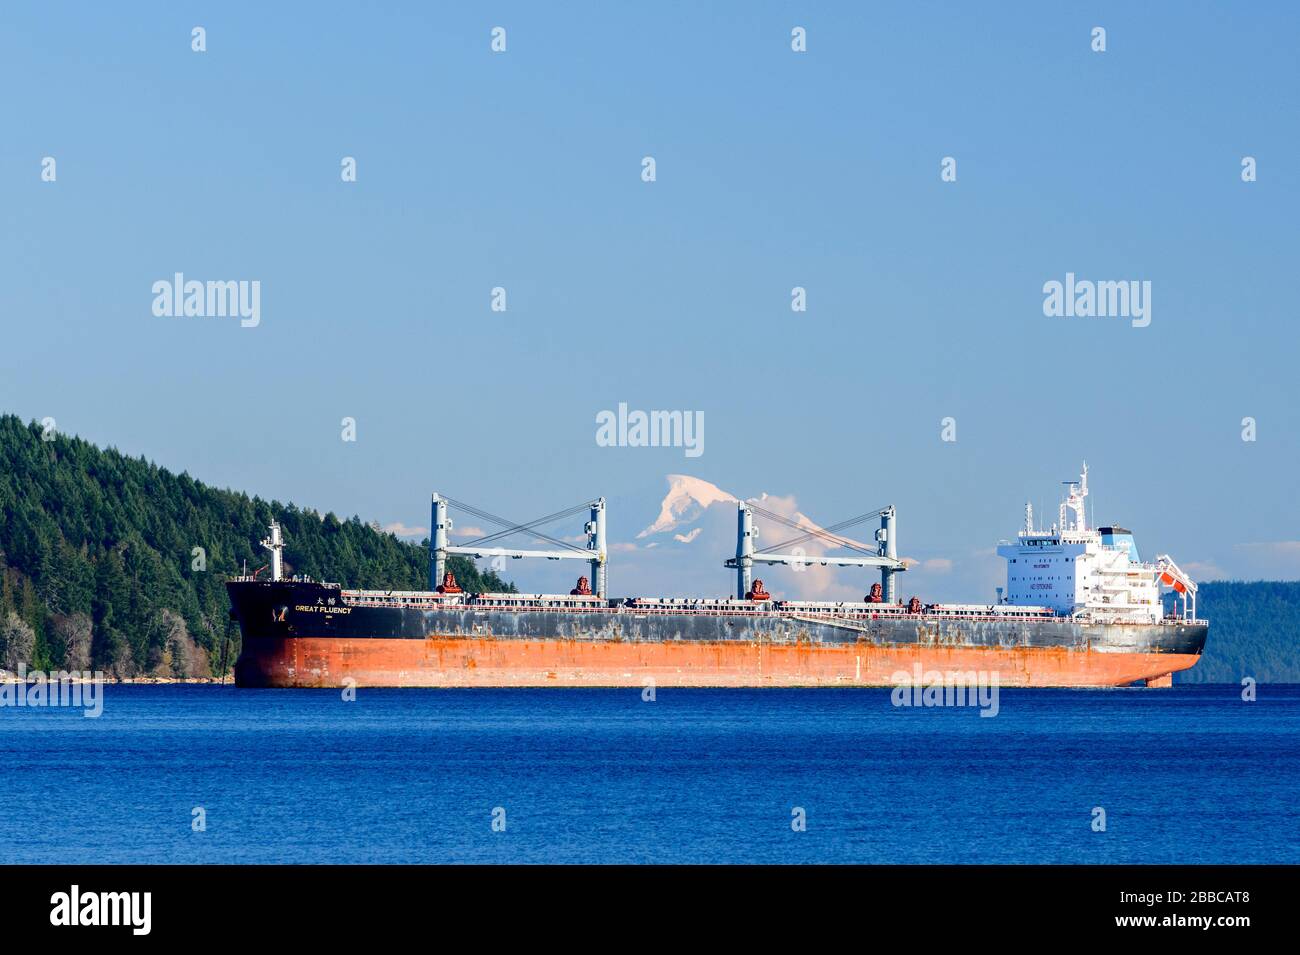 The freighter, Great Fluency, at anchor in Satellite Channel near Cowichan Bay, British Columbia.  Mt. Baker in Washington State is in the background. Stock Photo